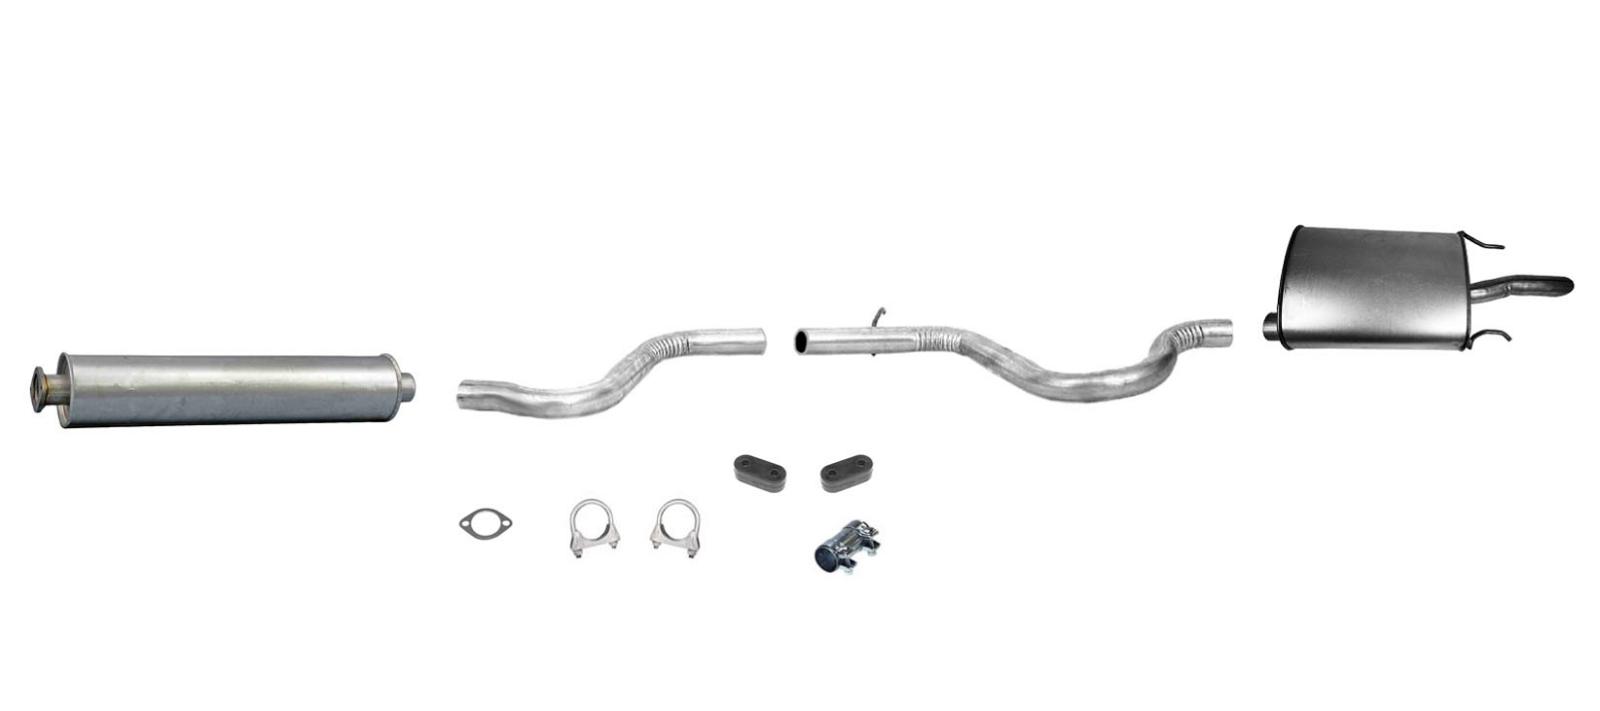 03-05 Impala 3.4L 3.8L Muffler Exhaust Pipe System 700293 ... 2001 impala exhaust schematic 